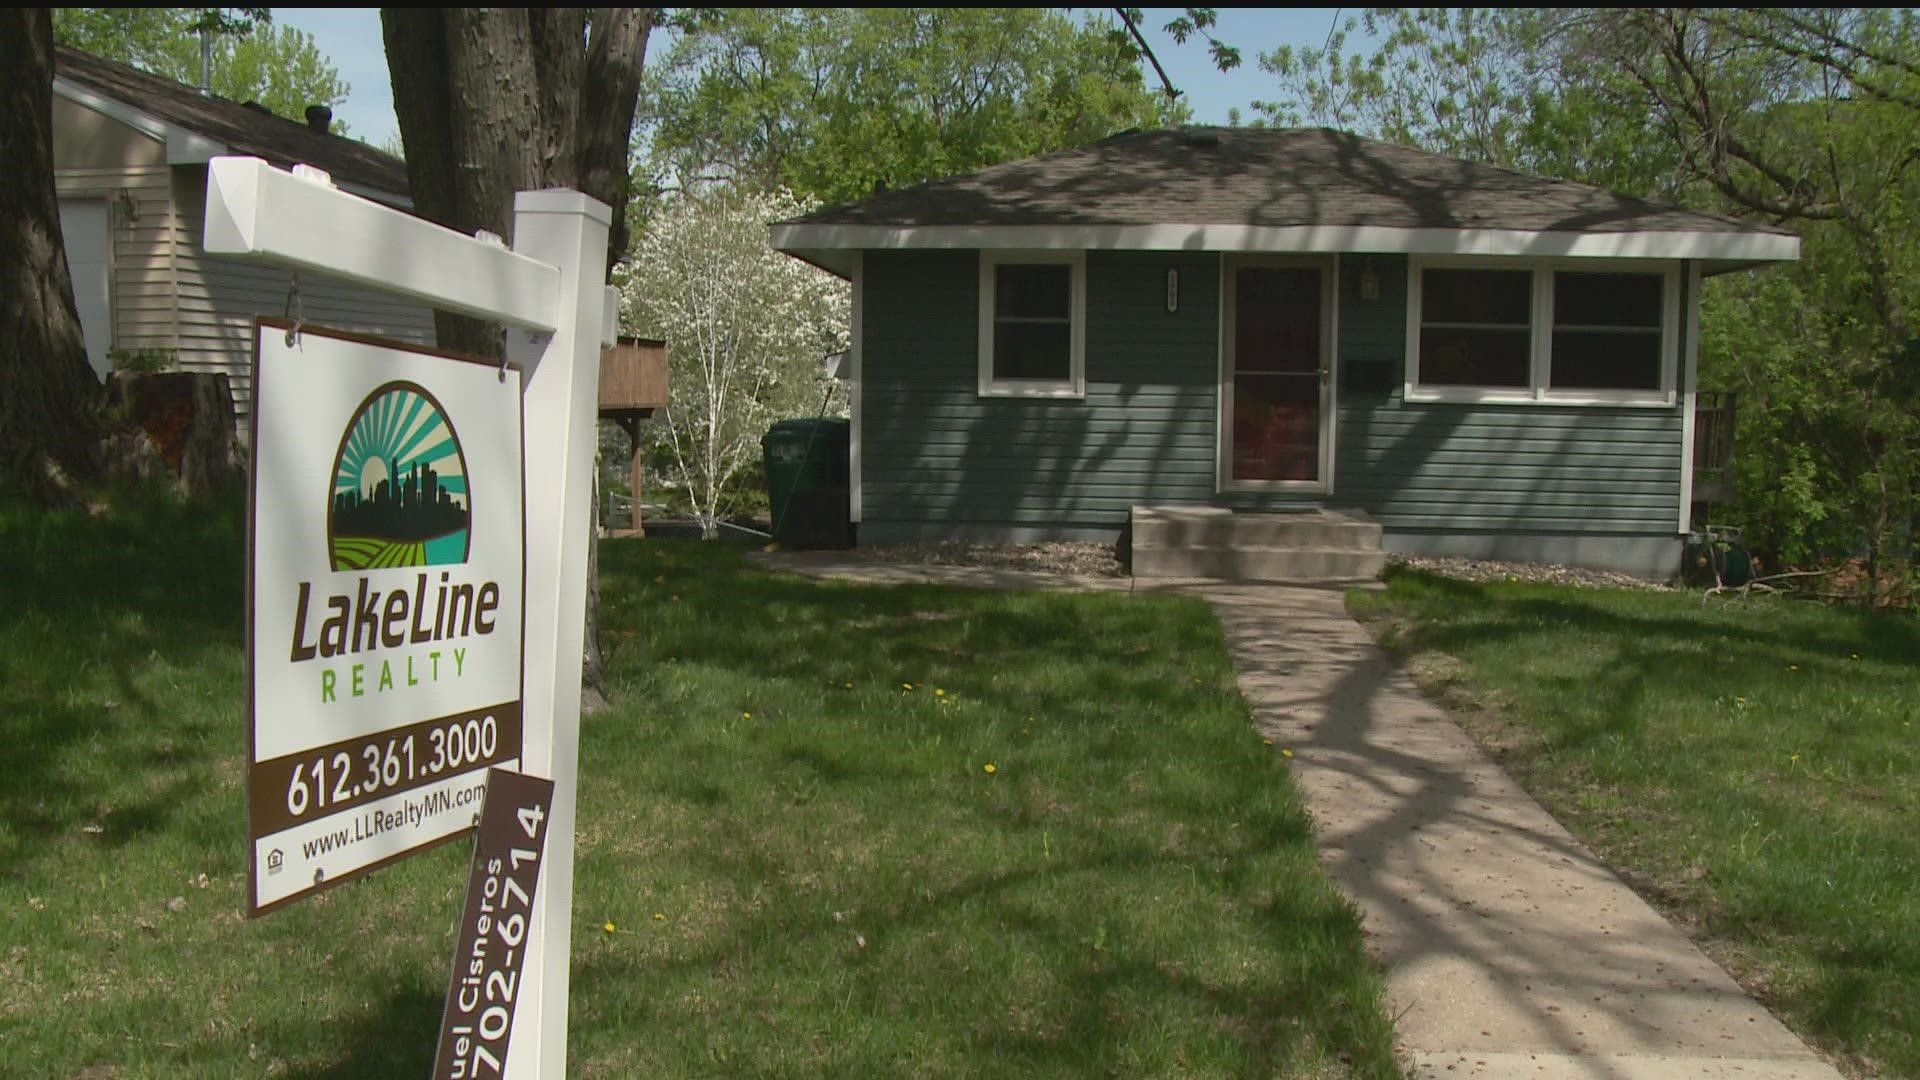 New data shows the median home price in the Twin Cities jumped to a record $370,000 in April 2022.